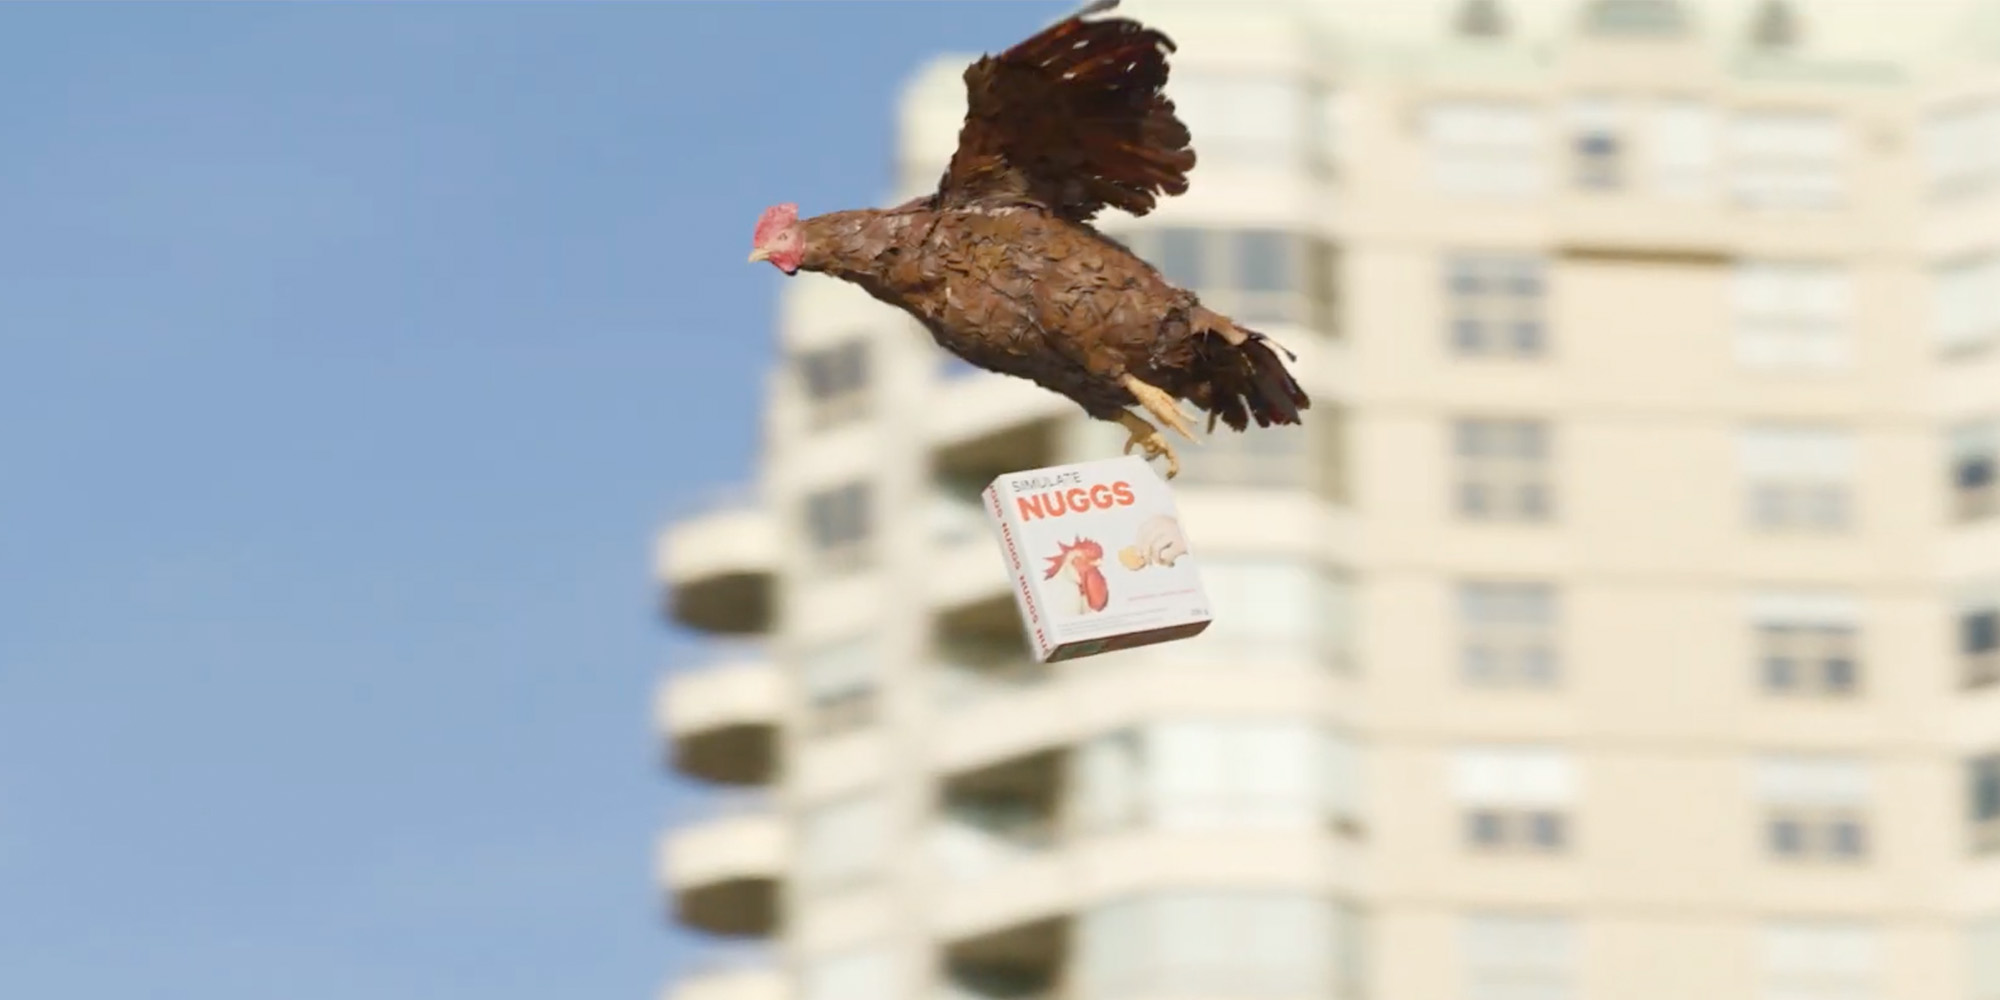 McCains Nuggs - Flying Chicken